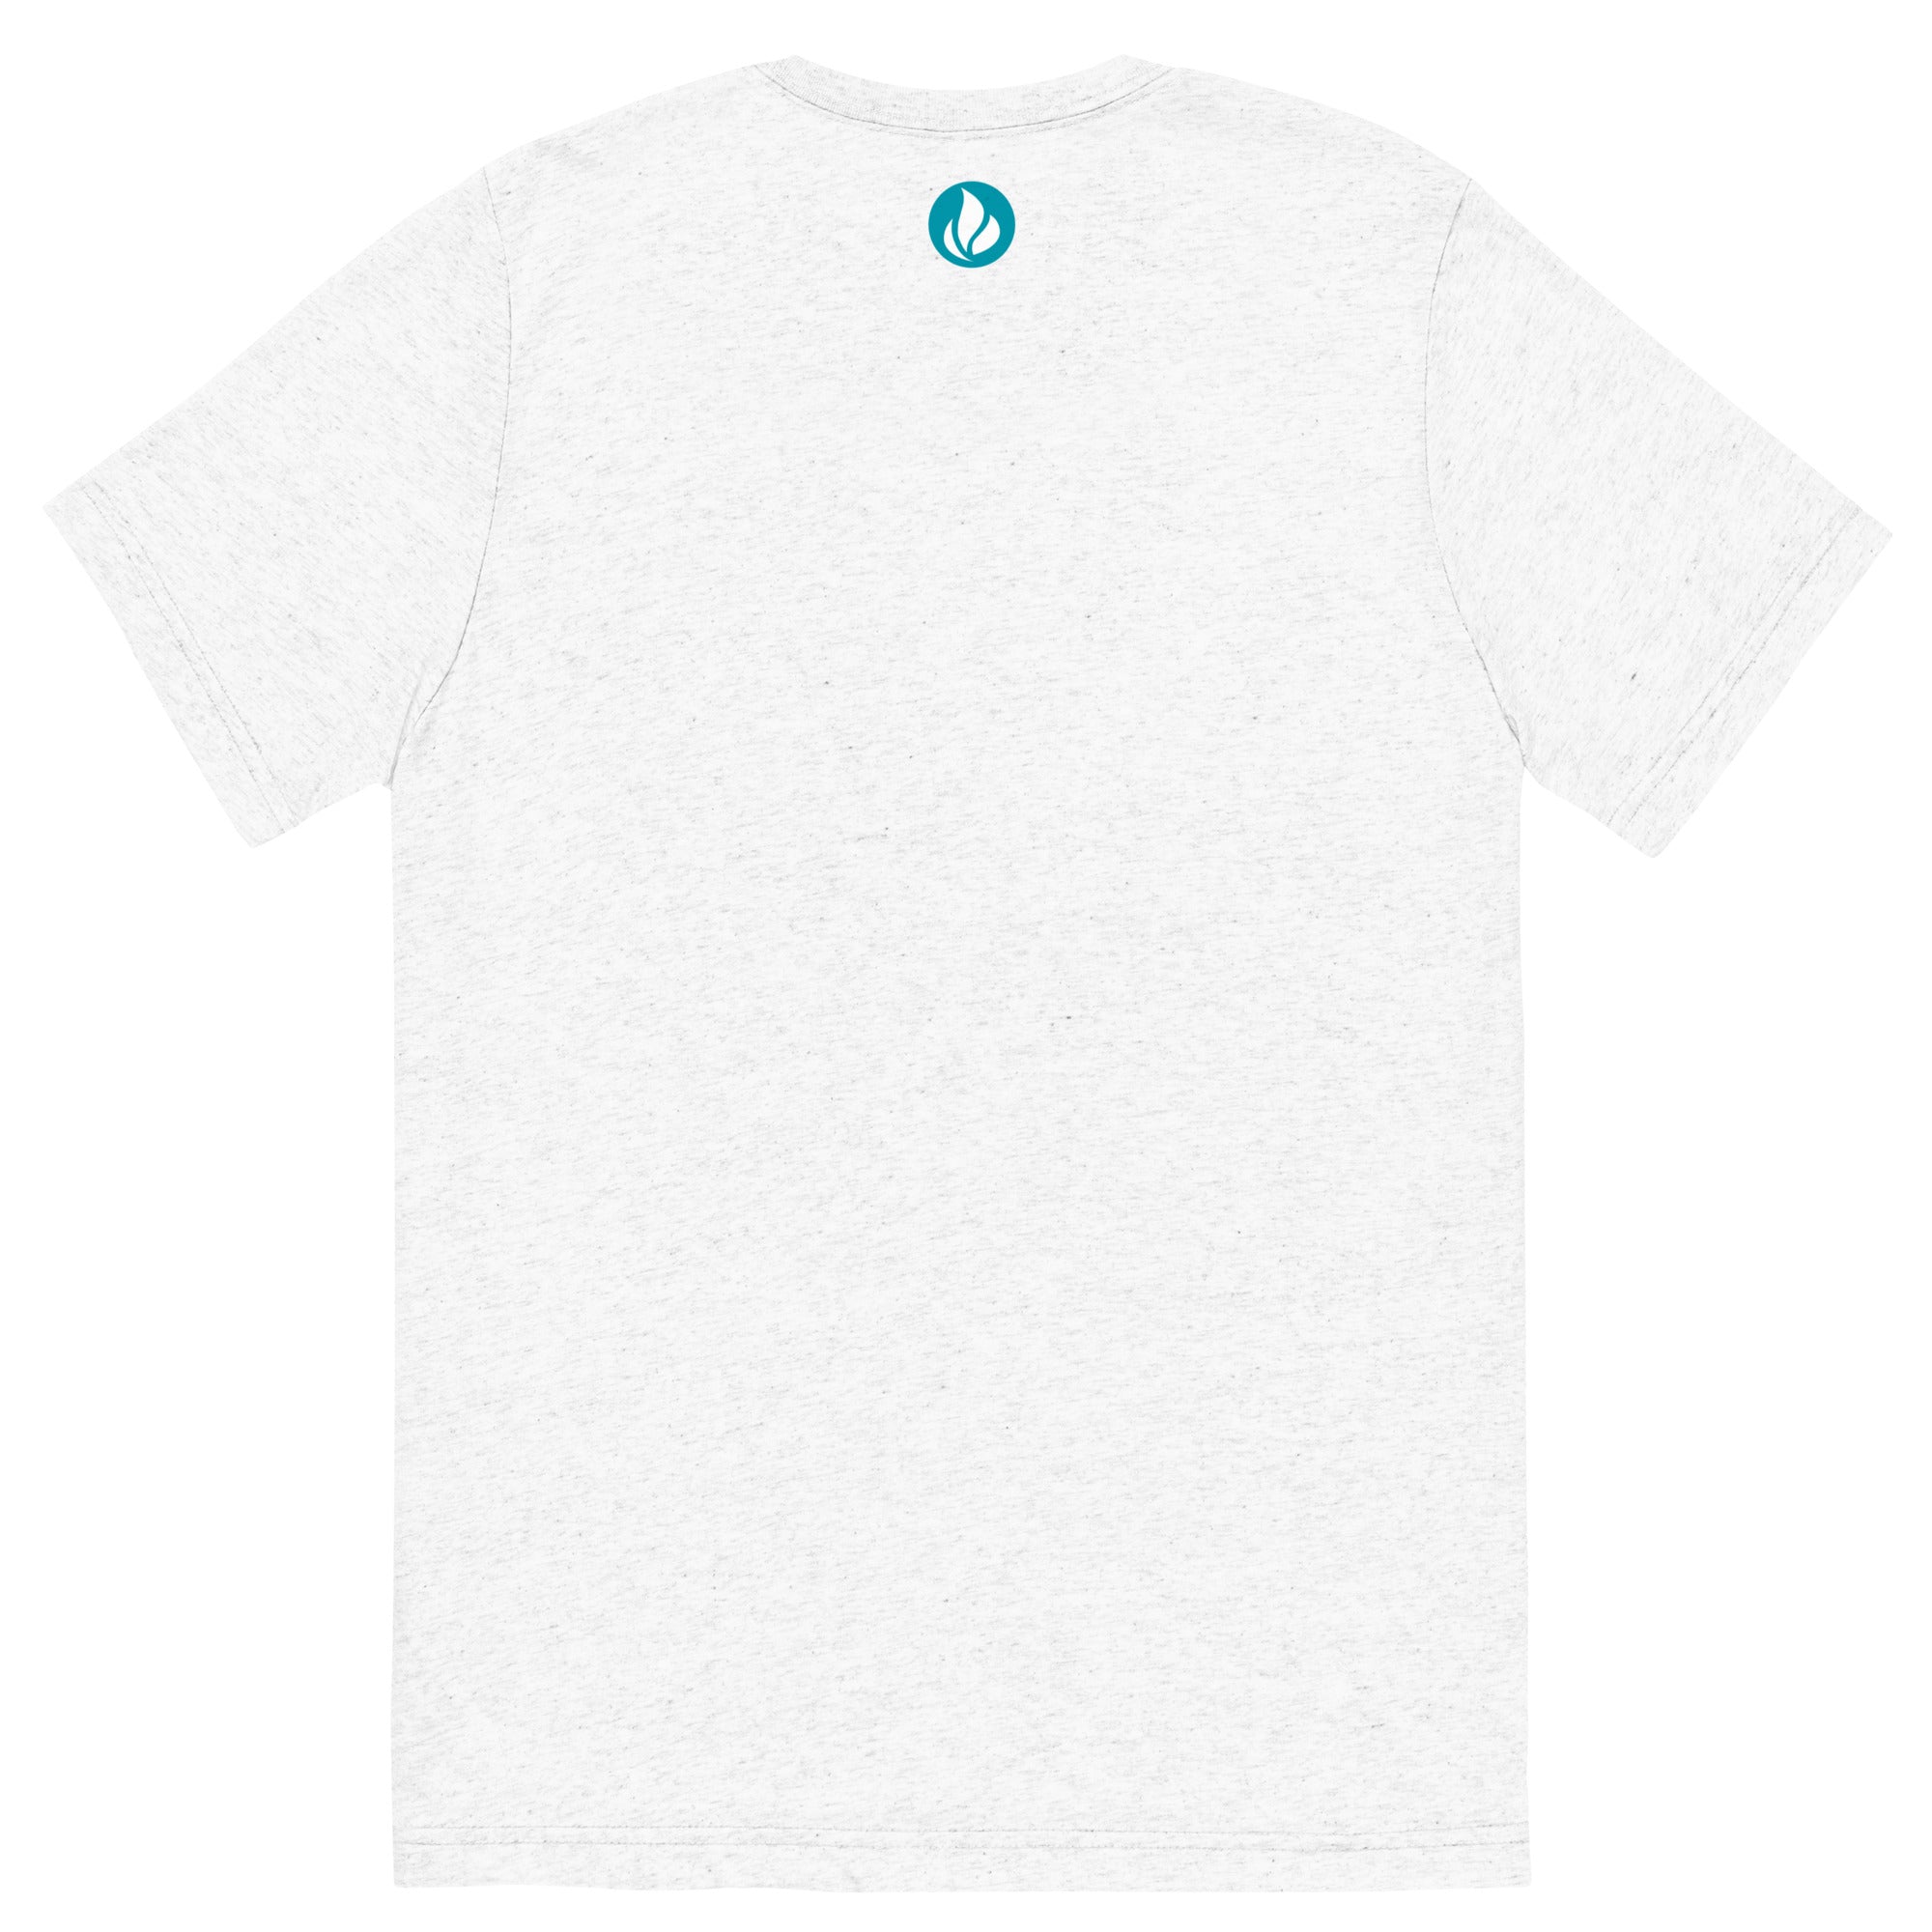 Brighter Together Foundation - Unisex Short sleeve t-shirt in White